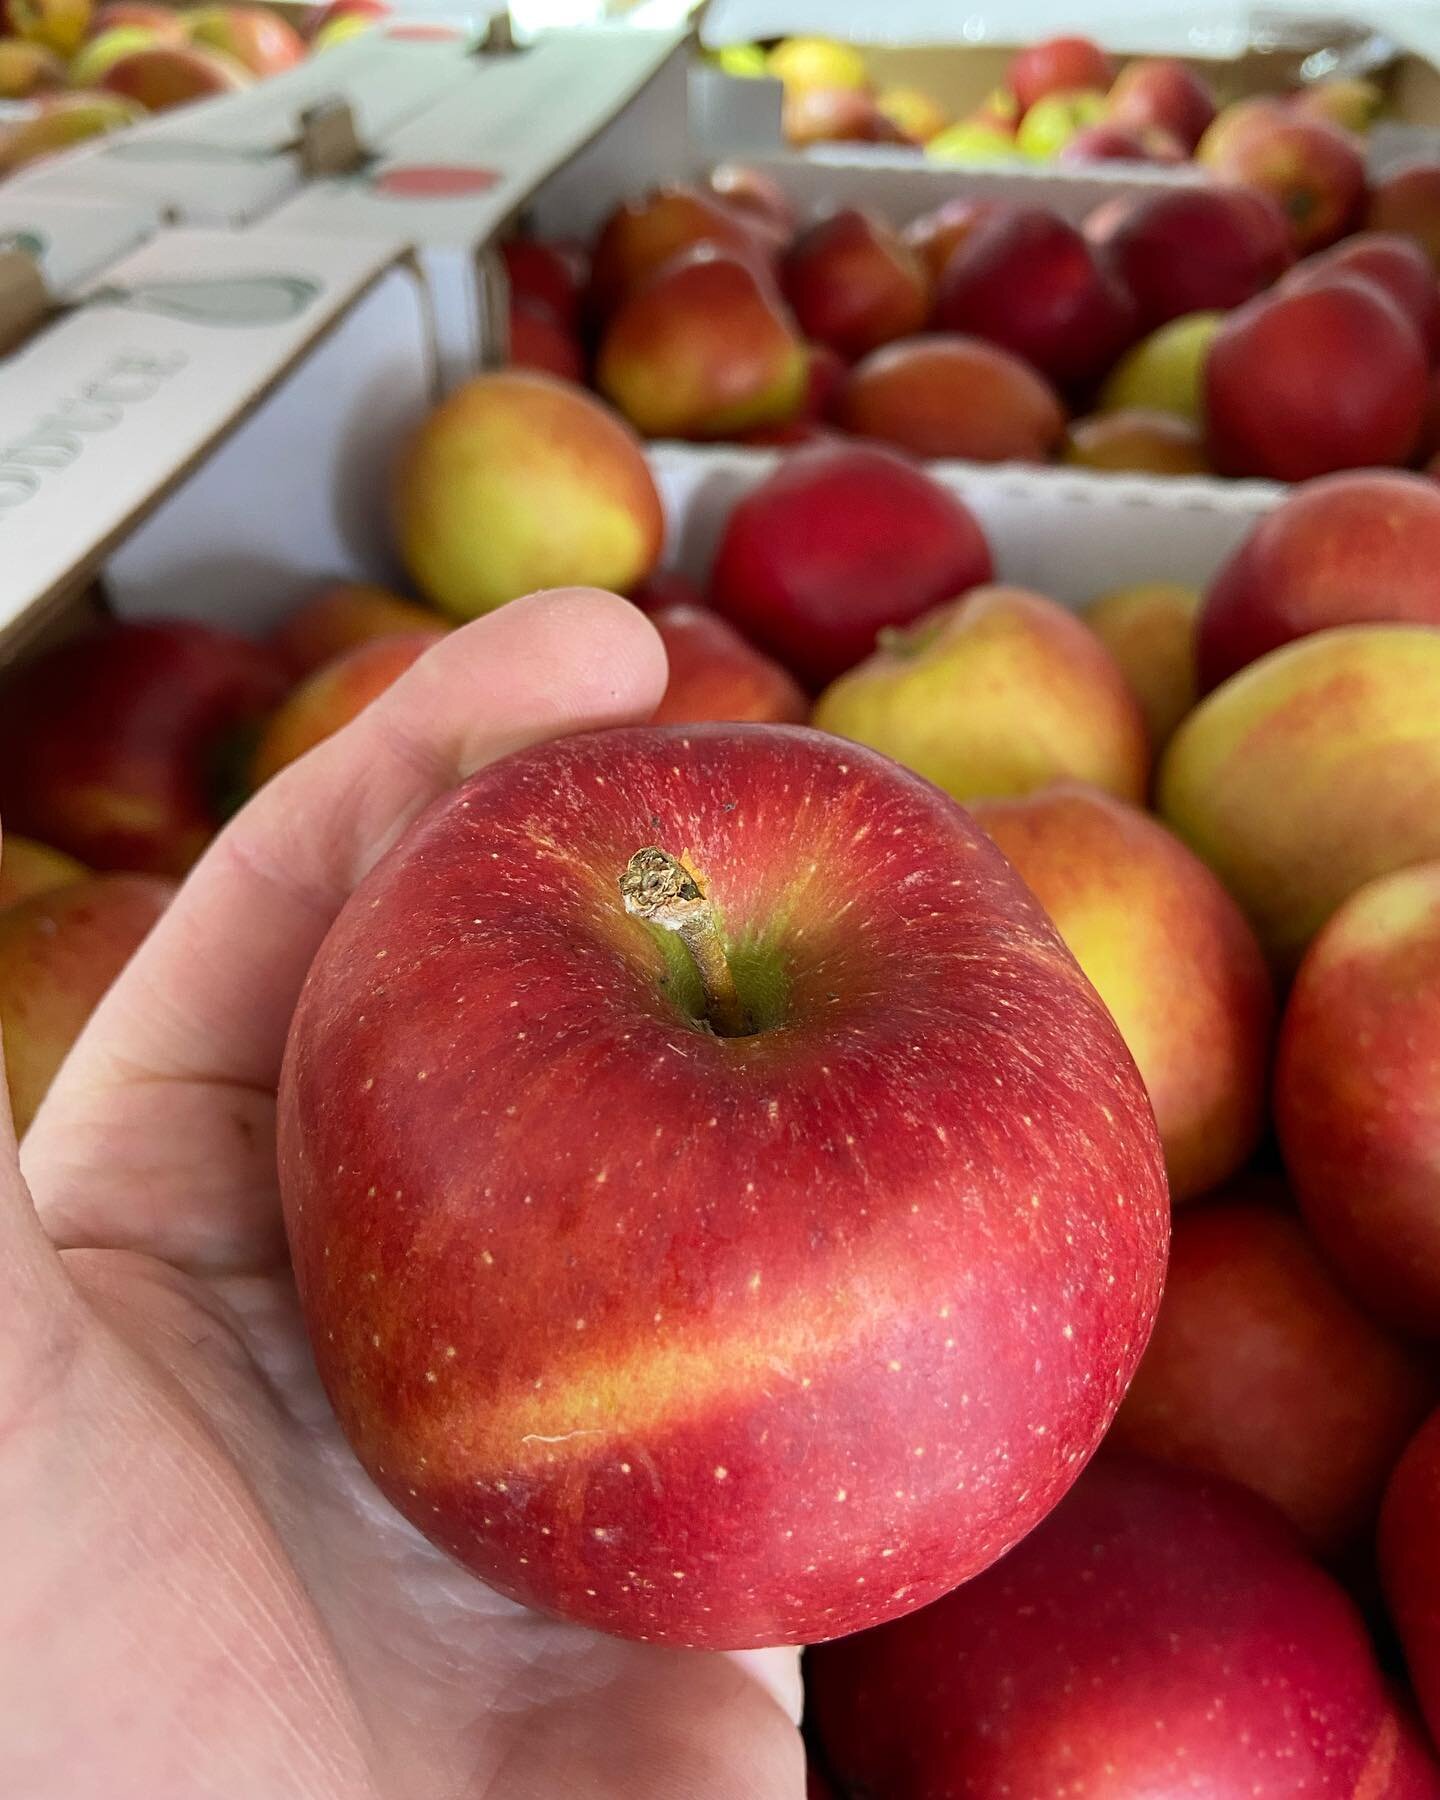 Our Sussex Braeburn apples are mind blowing. These little gems were harvested back in September/October and have been kept in an atmospherically modified area (posh fridge) so when we pull them out to deliver to our customers across London and the so